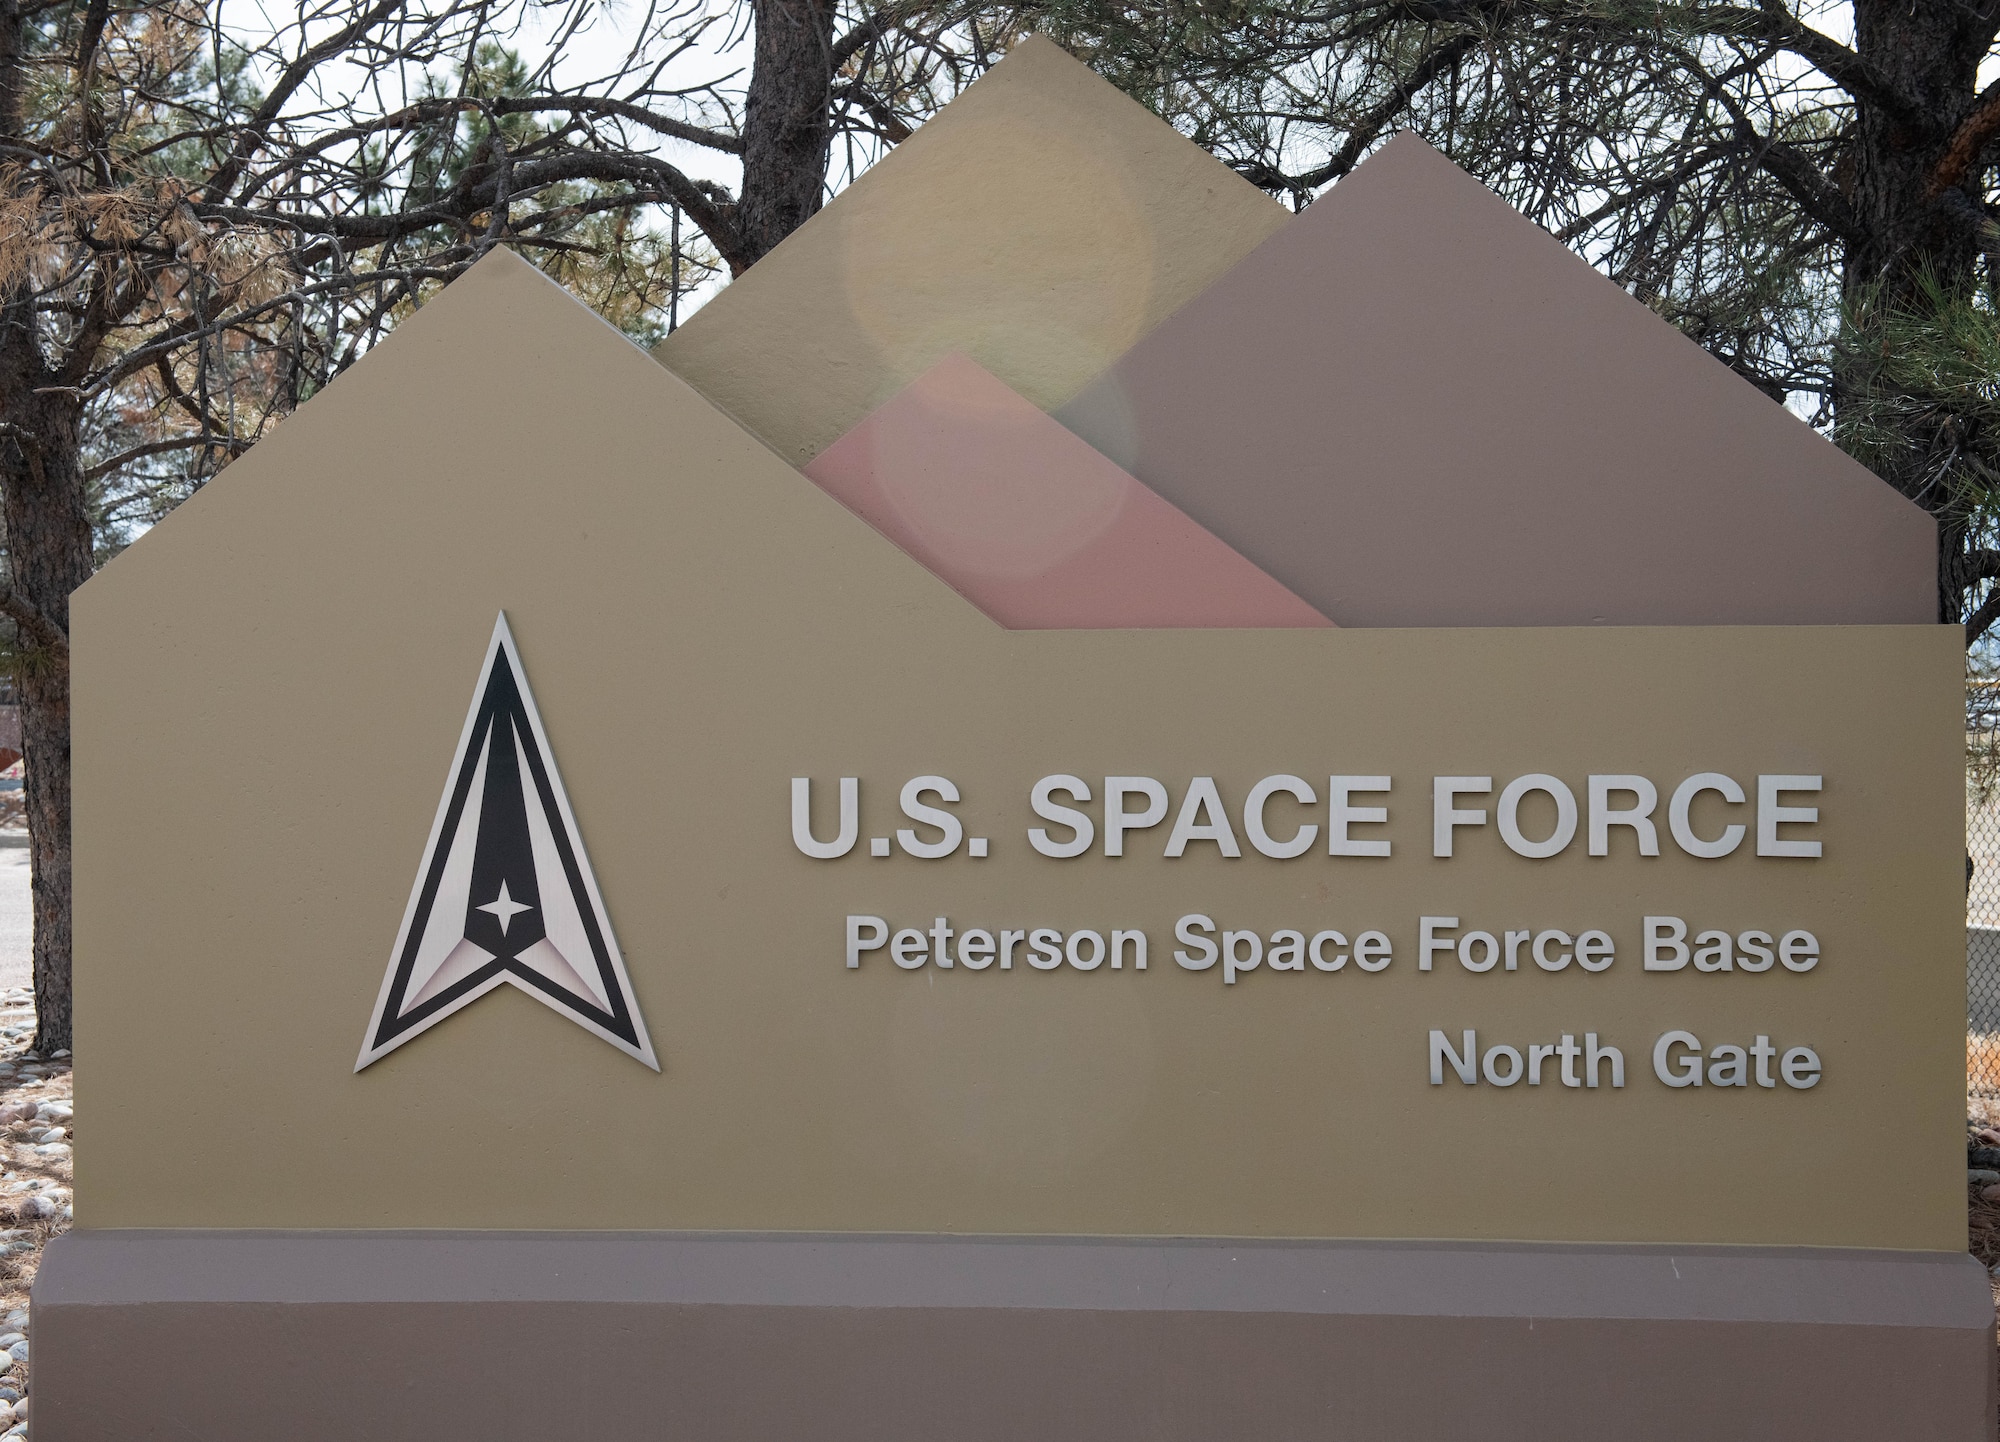 Image of Peterson Space Force Base's North gate.